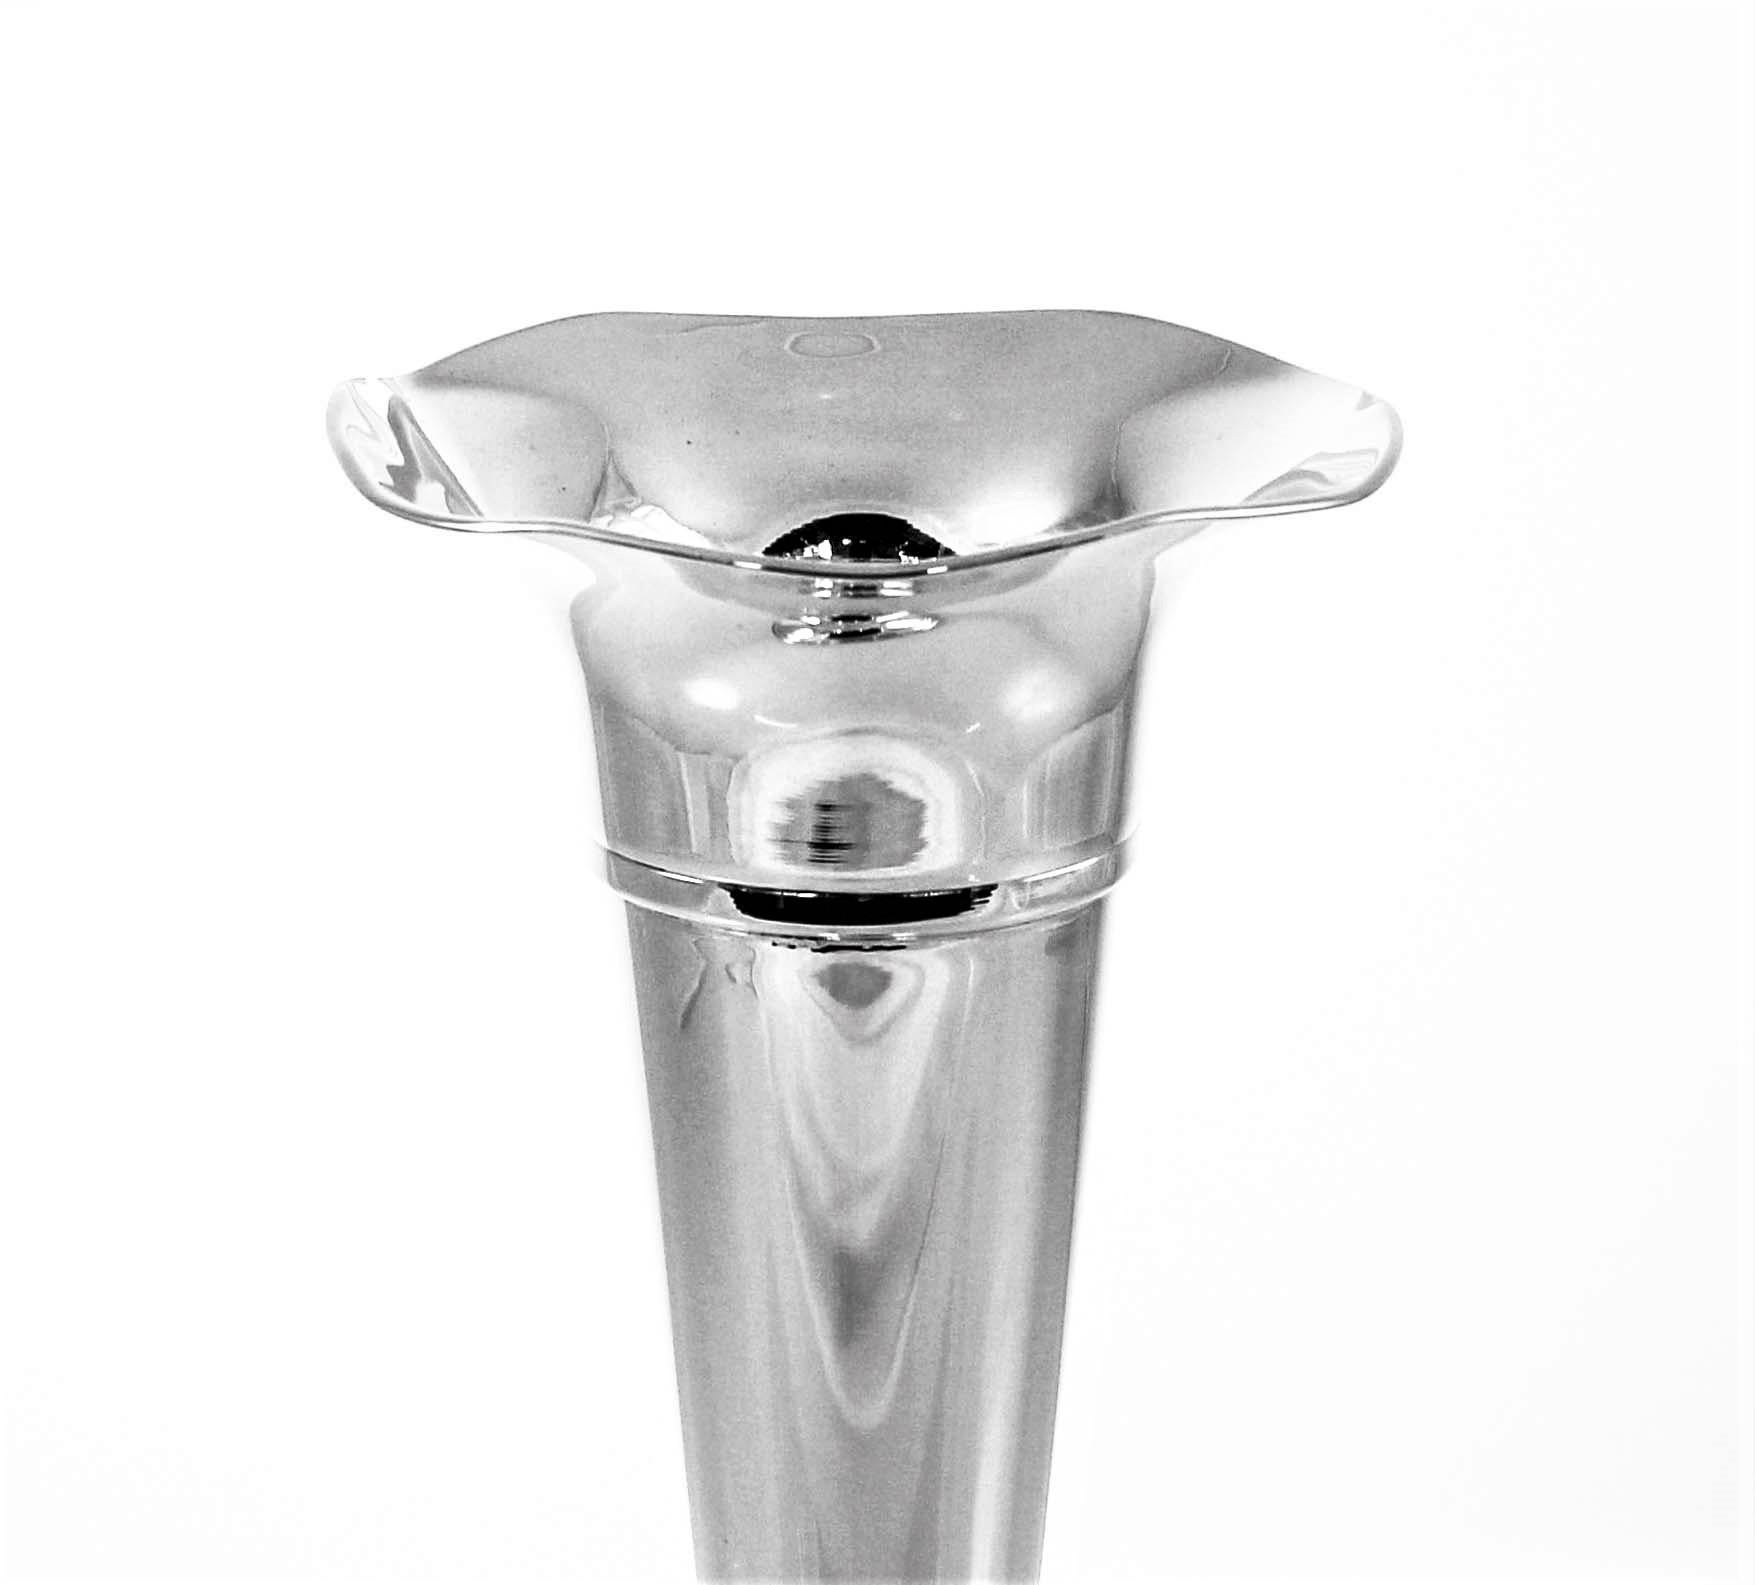 A simple tapered shape sterling bud vase with a scalloped top. Goes with any decor or style. For those areas in your house (or office) that need brightening up but aren’t big enough to hold a full-size vase end-tables, powder rooms, desks and vanity